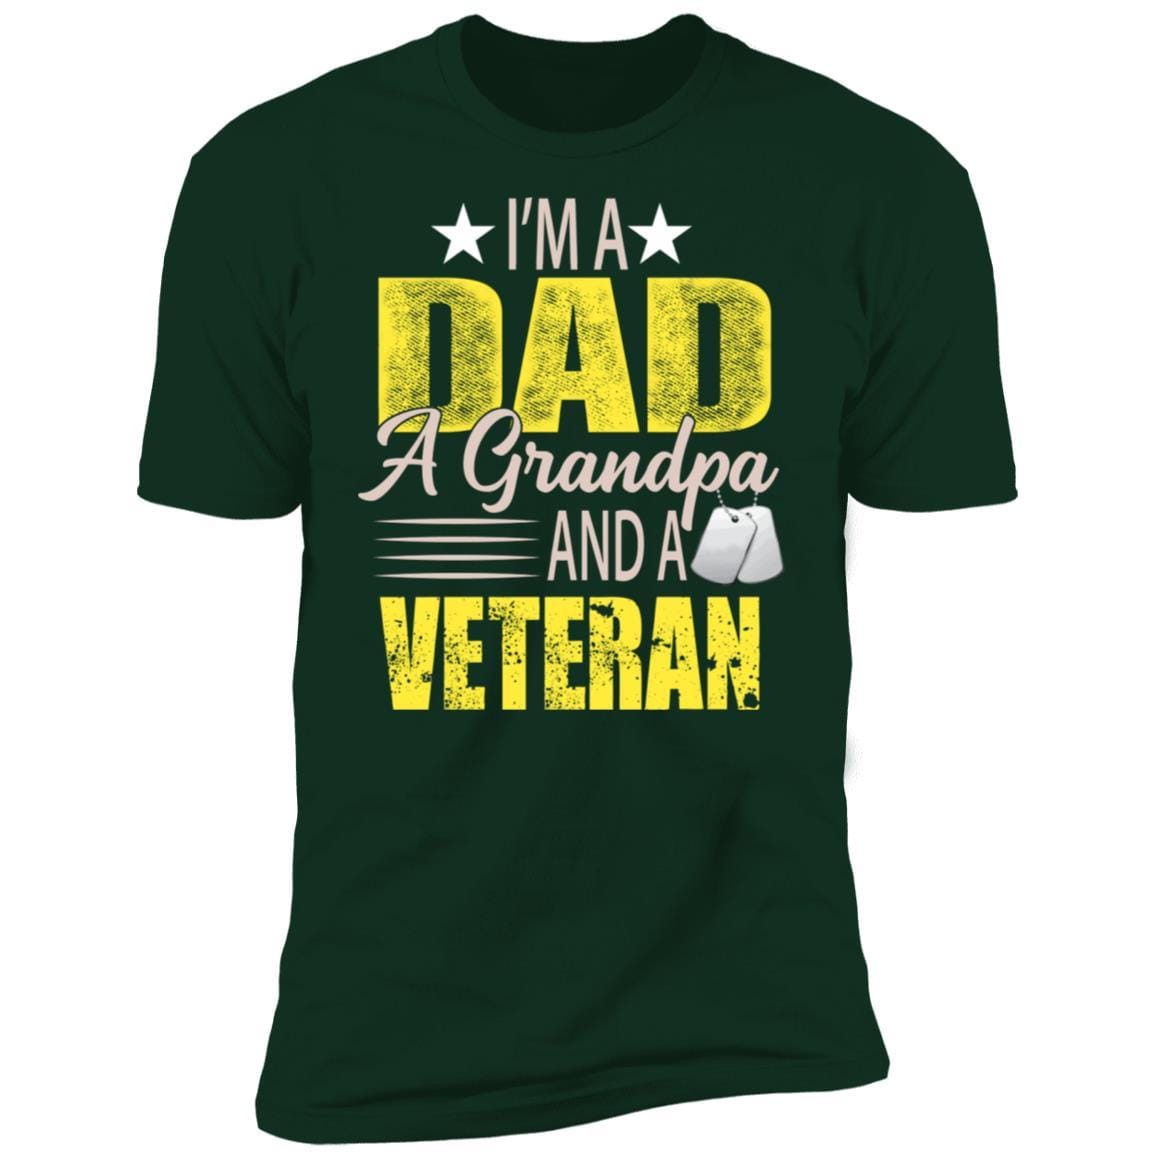 Military T-Shirt "I'm a Dad, a Grandpa and a Veteran - Next Level Premium On" Front-TShirt-General-Veterans Nation